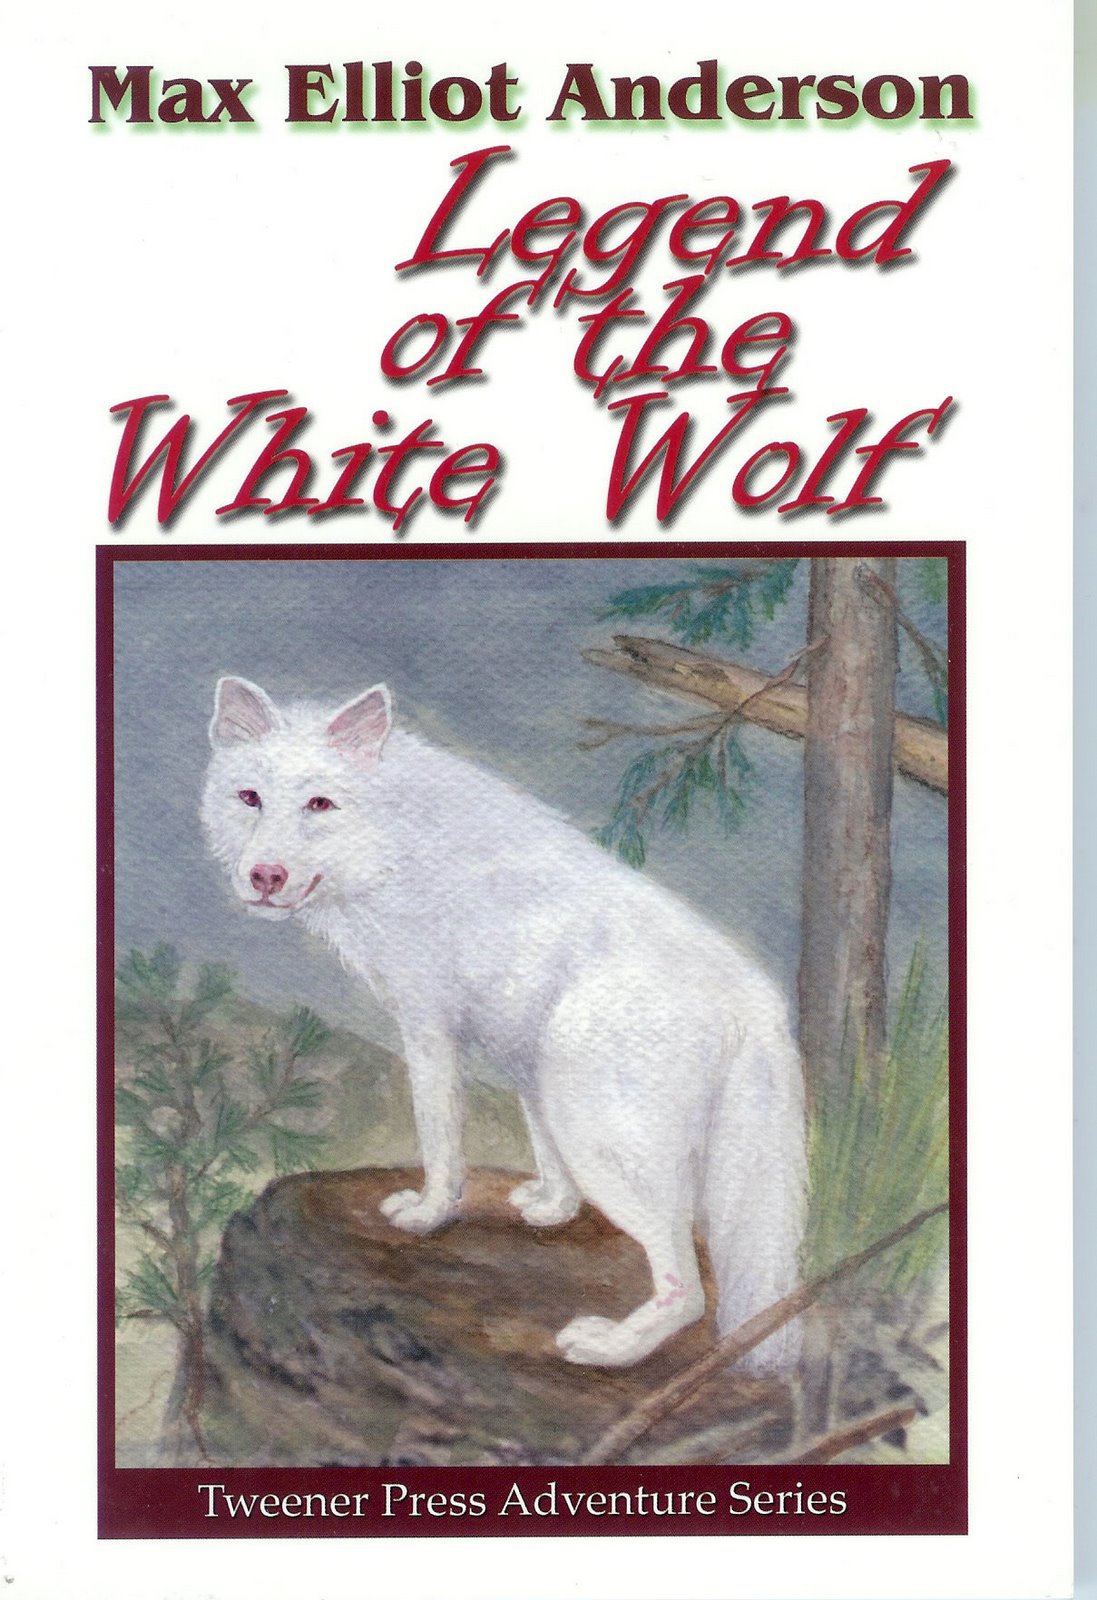 [LEGEND-OF-THE-WHITE-WOLF-co.jpg]